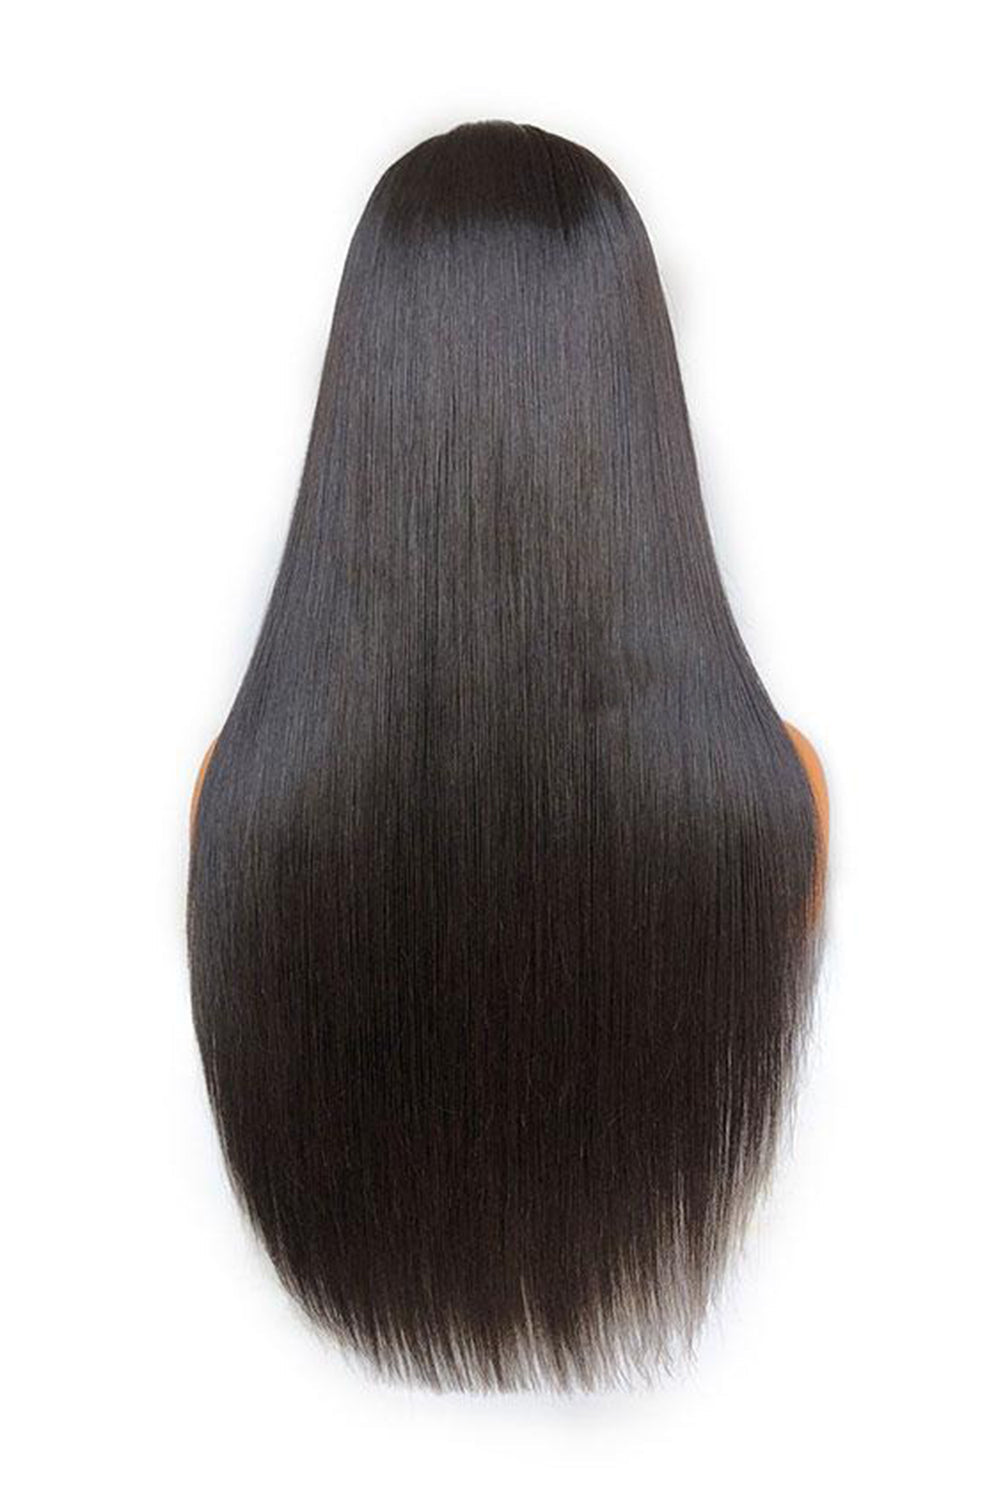 13x6 Glueless Hd Lace Straight Black Wig with Bangs-HD58